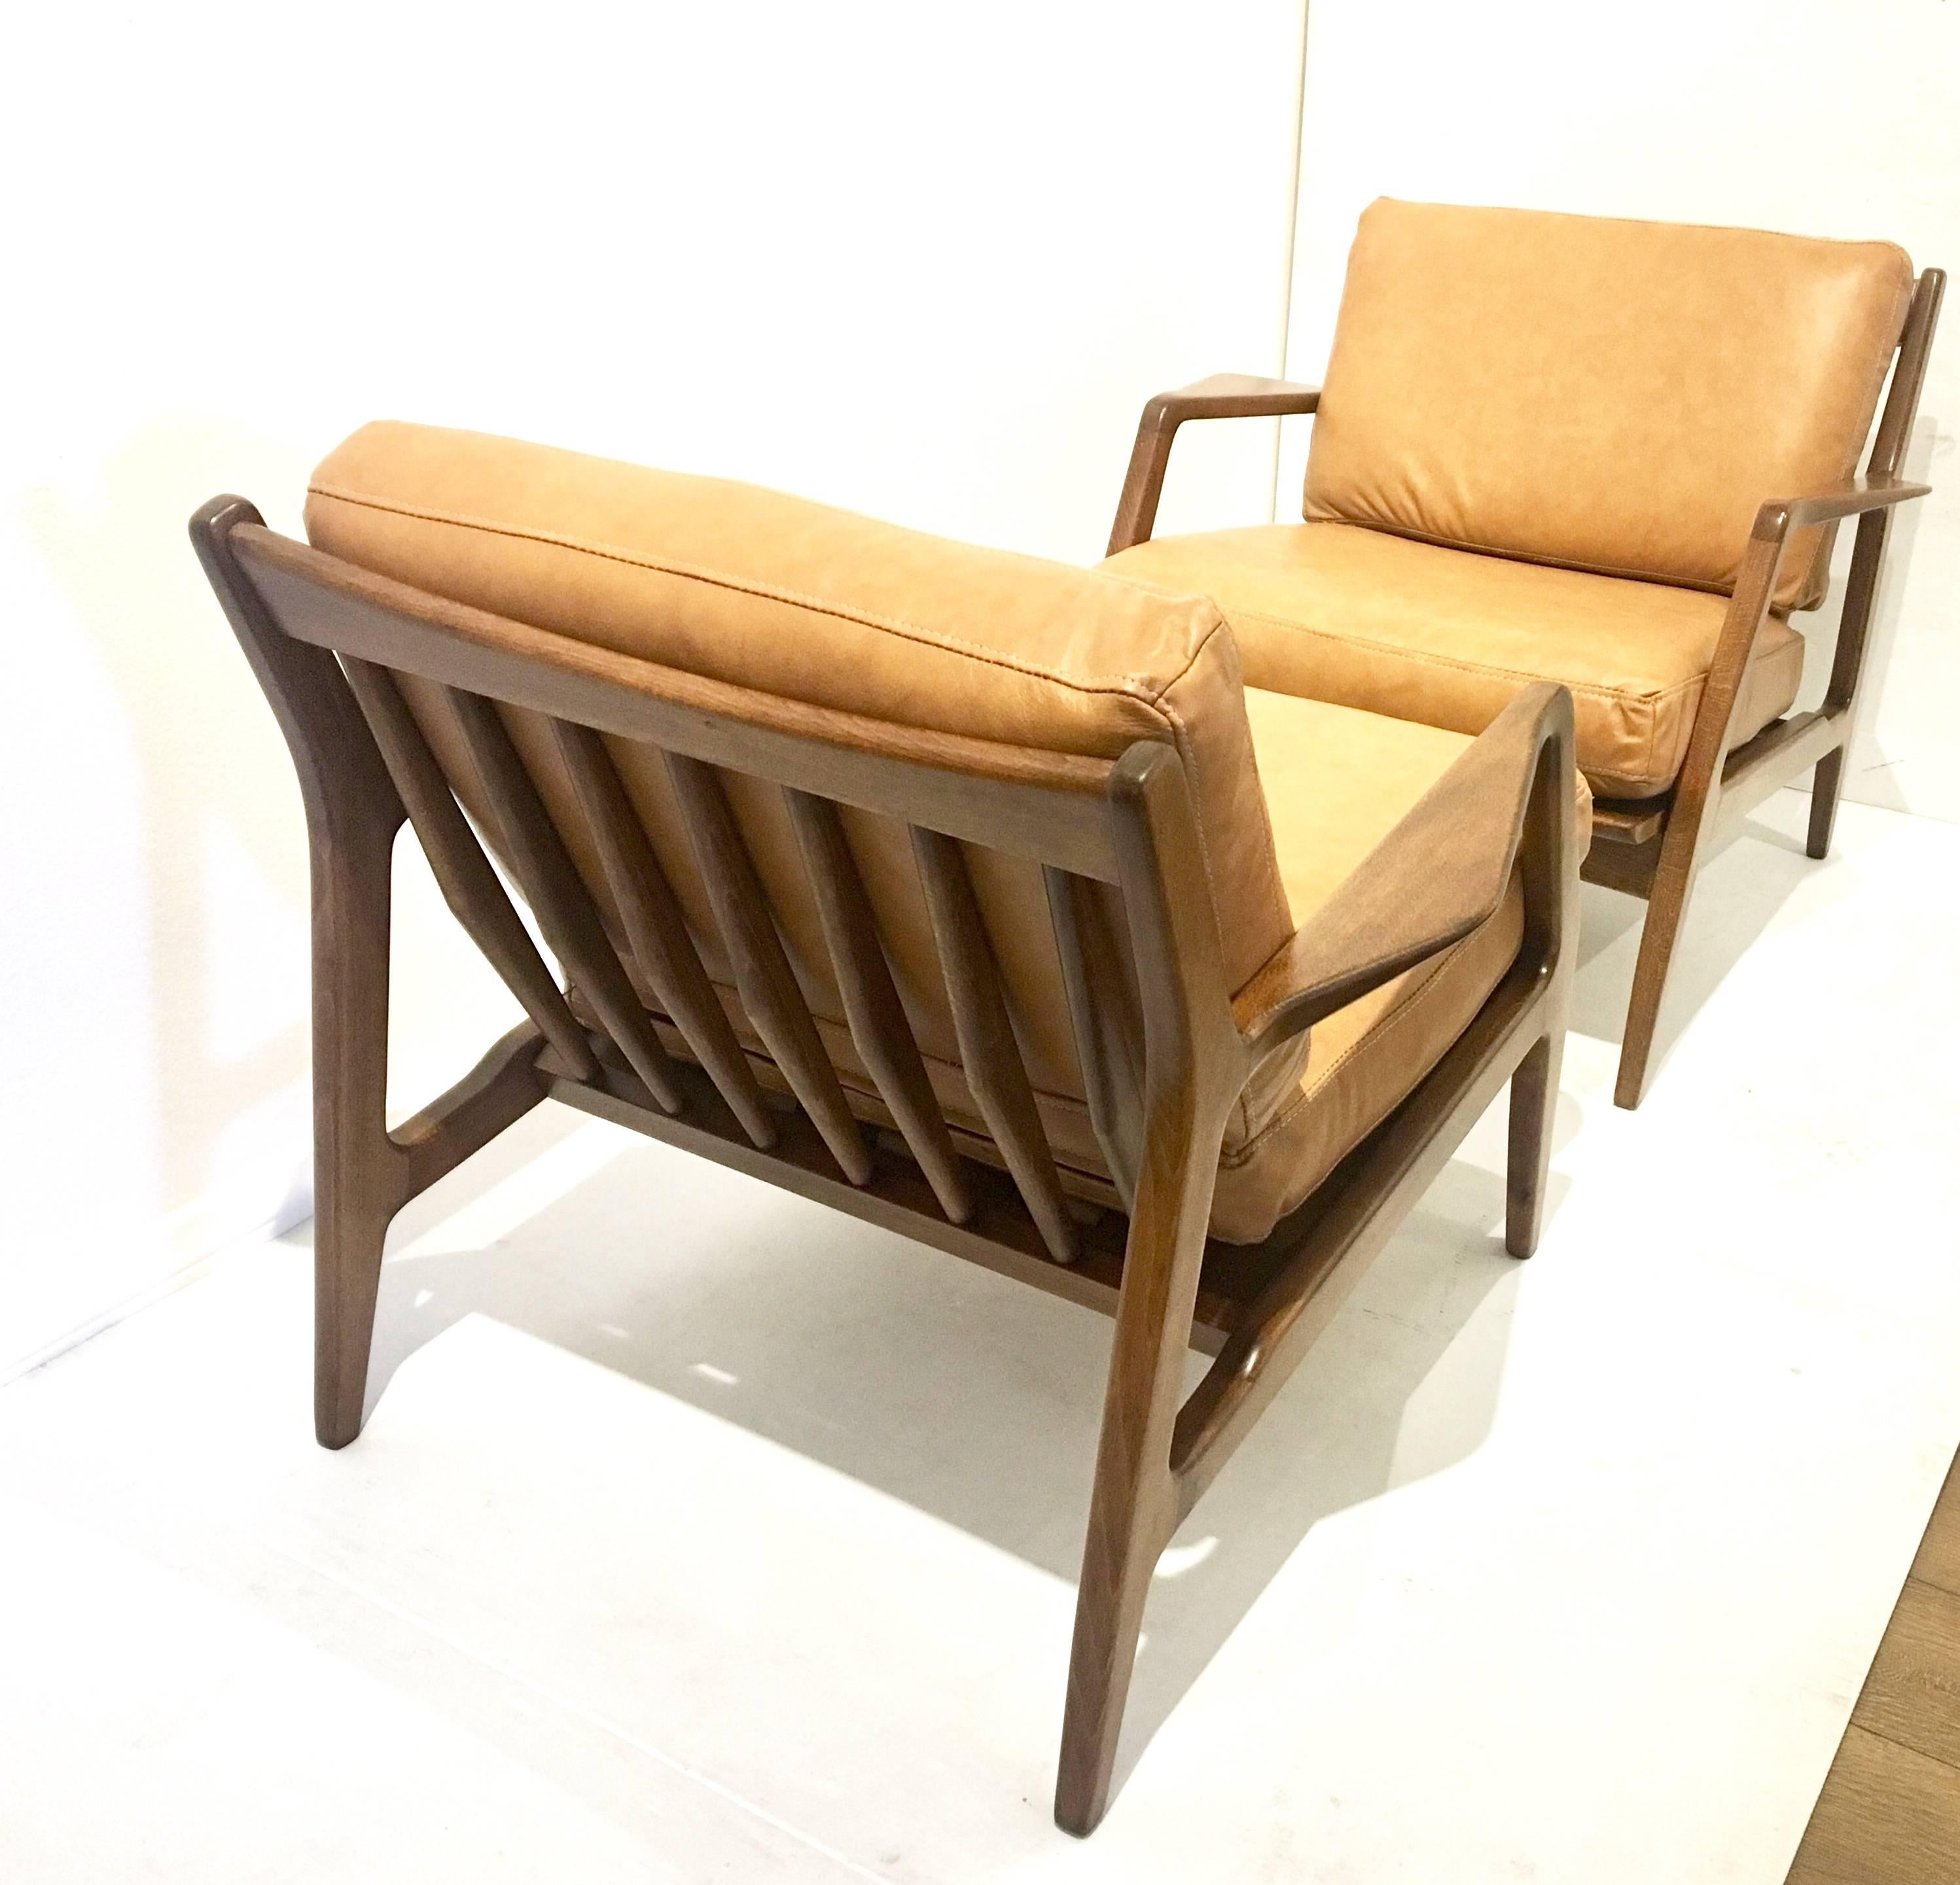 20th Century Pair of Danish Modern Chairs in Leather by Kofod Larsen